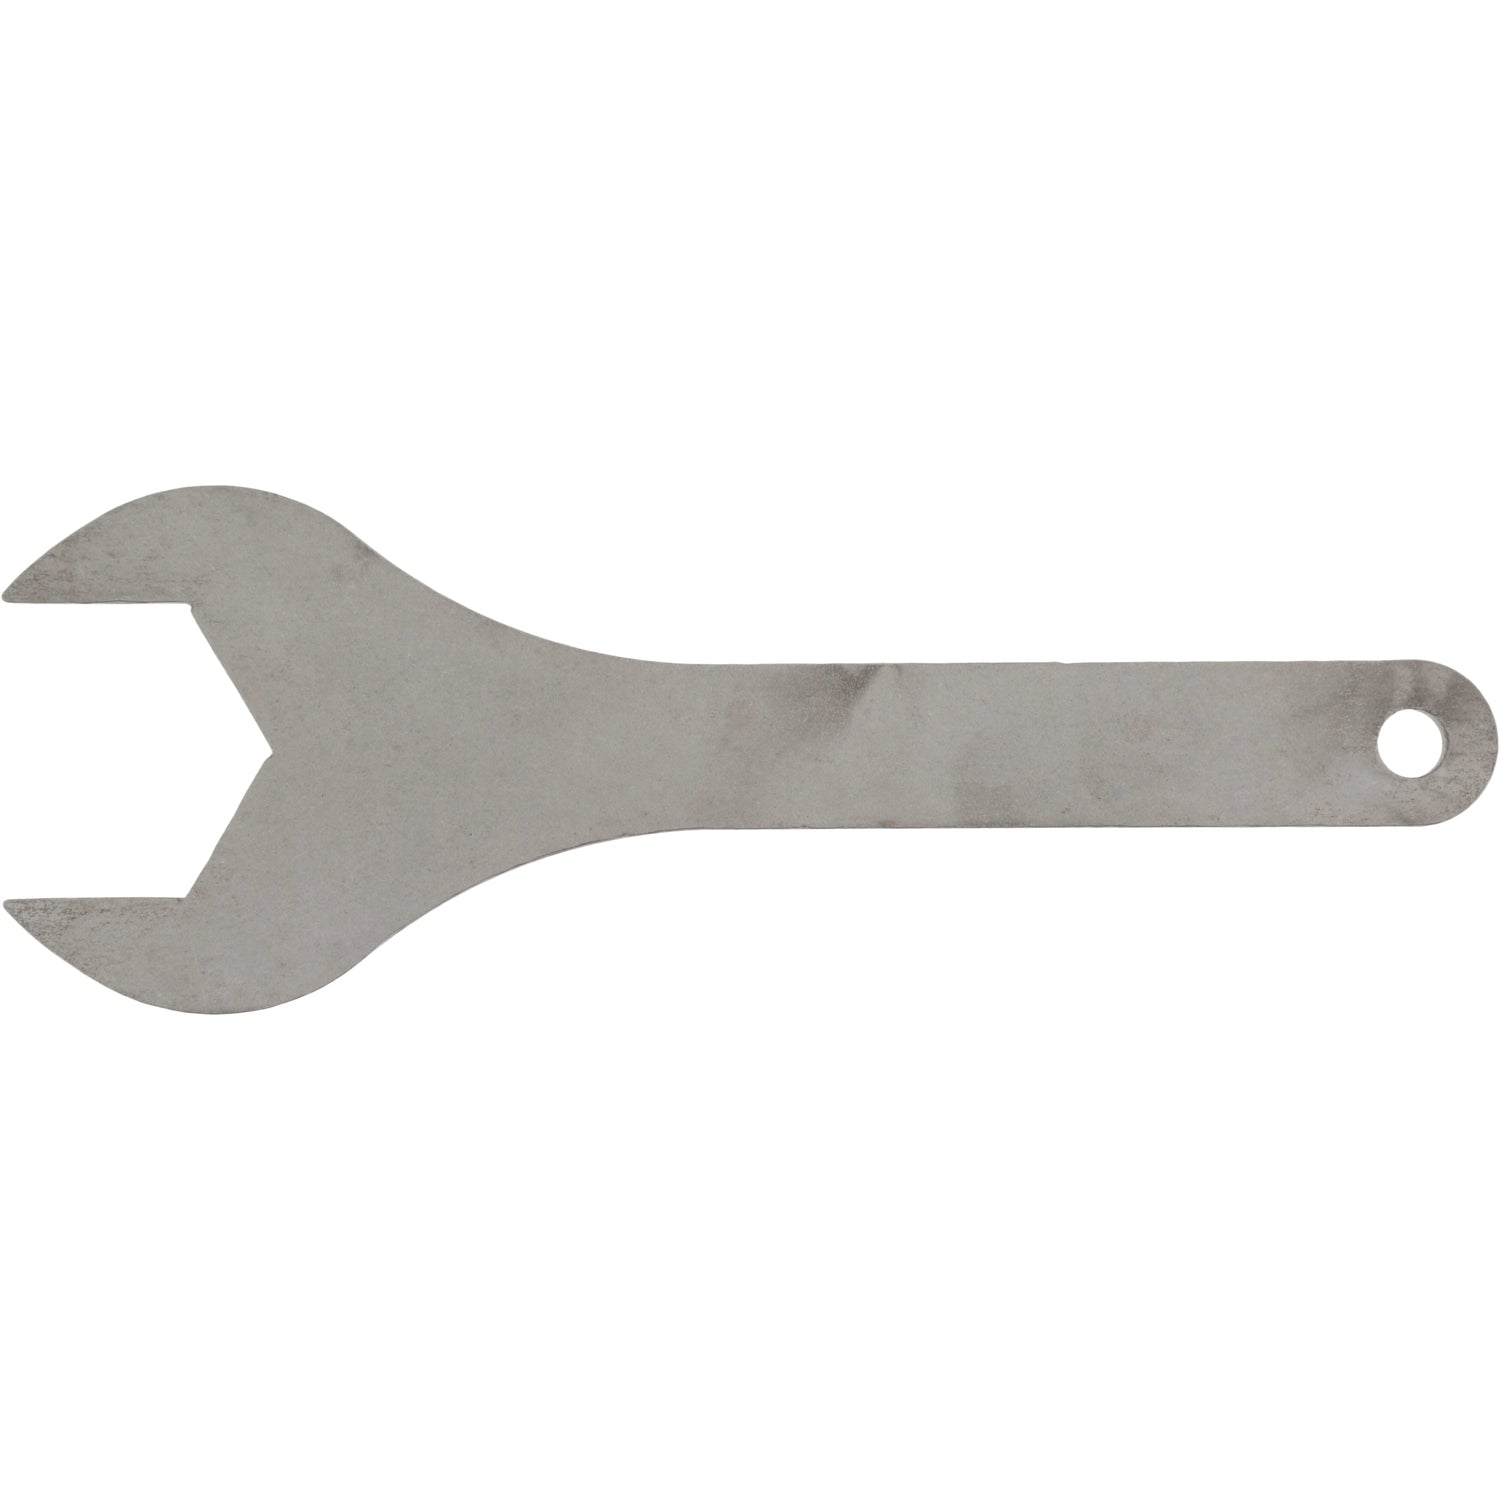 Stainless steel wrench with rounded handle shown on white background.